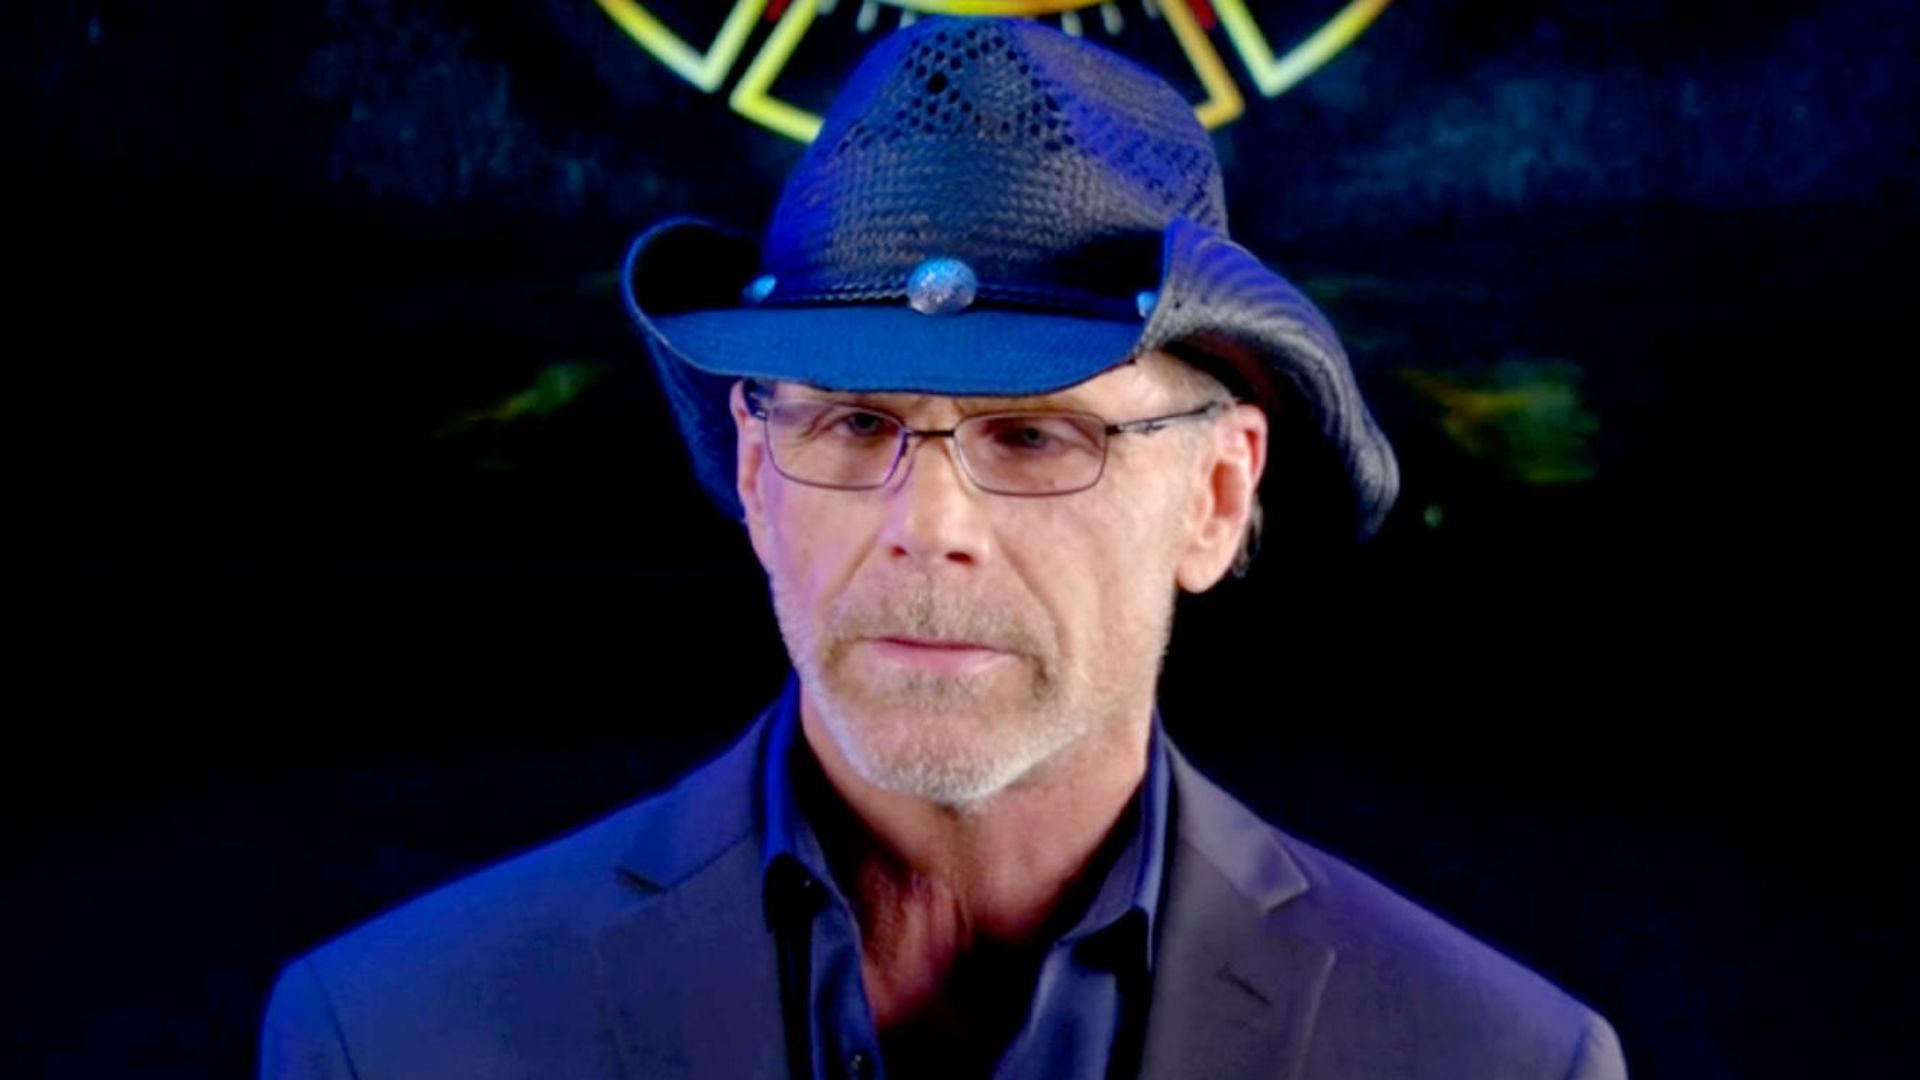 Shawn Michaels recently commented on the ongoing Vince McMahon situation 